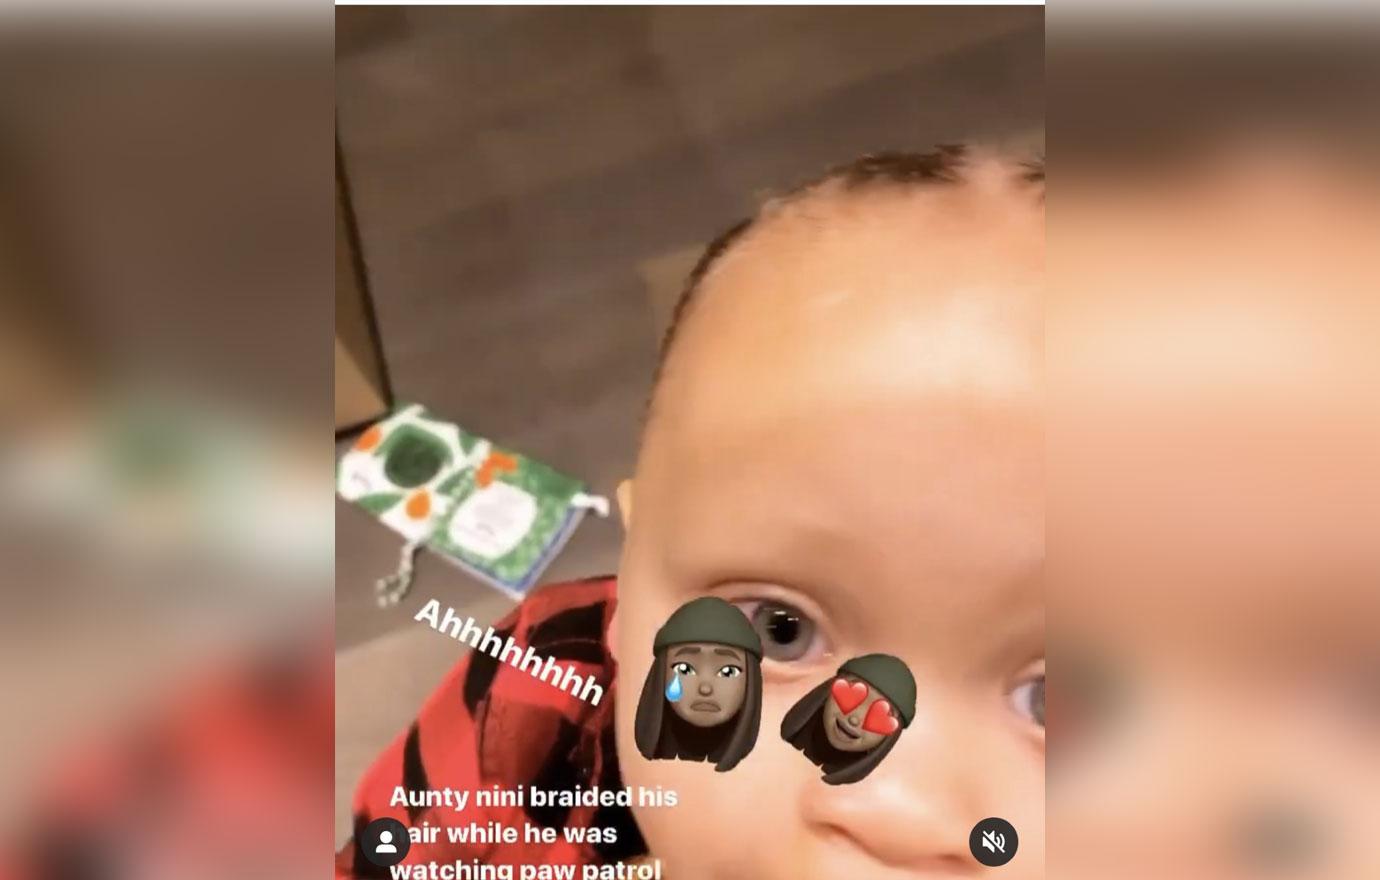 Ayesha Curry Shares Video Of Canon Jack After His Aunt Braided His Hair